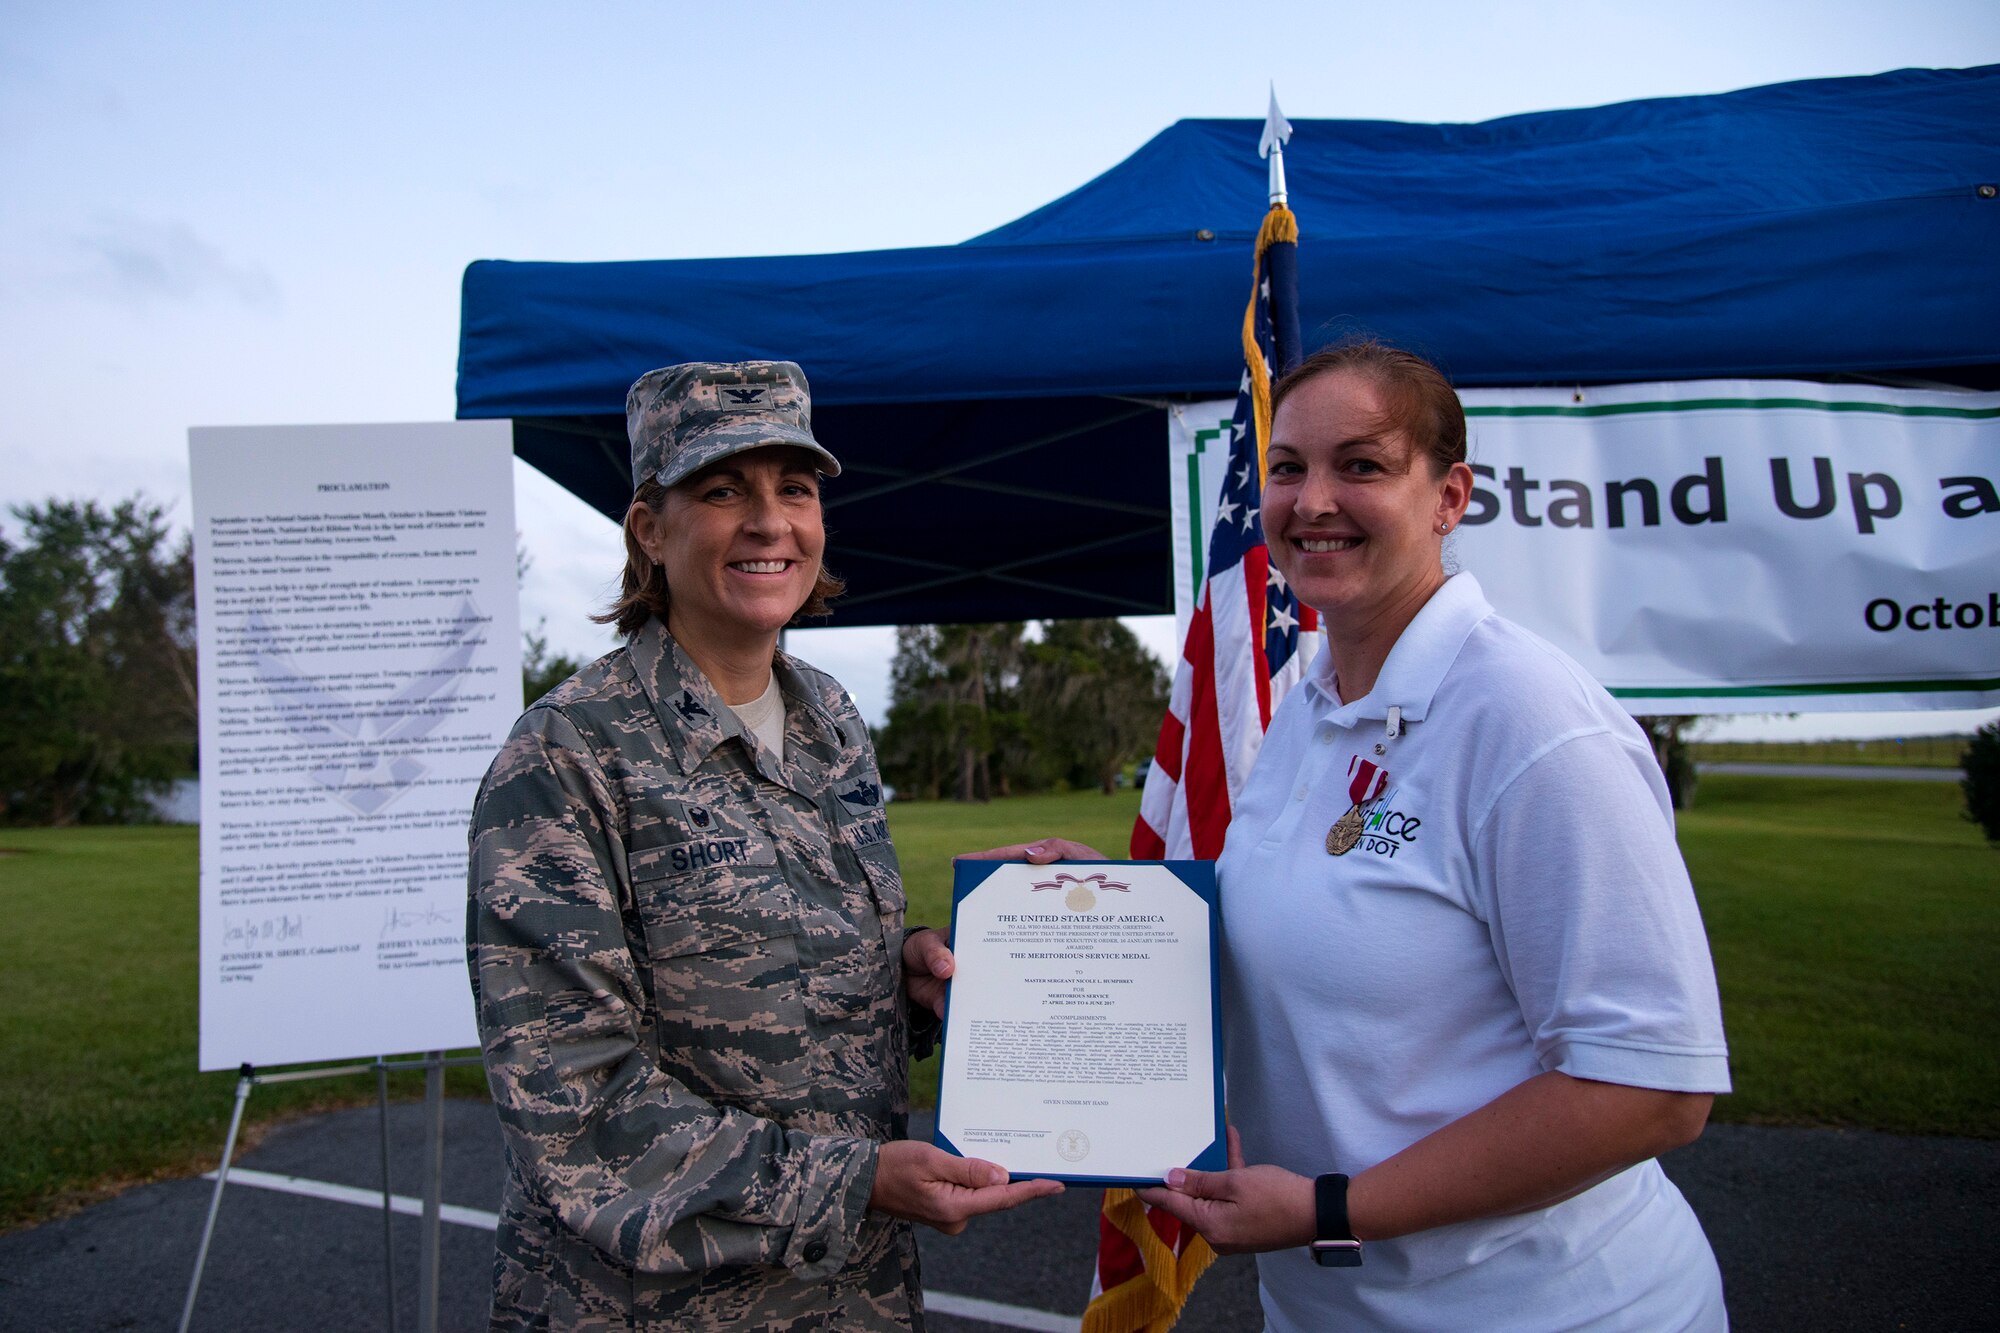 Col. Jennifer Short, 23d Wing commander, left, and Master Sgt. Nicole Humphrey, 23d Maintenance Group training section chief, pose for an award, Oct. 4, 2017, at Moody Air Force Base, Ga. Humphrey received the Meritorious Service Medal for her service with Green Dot, a training program dedicated to violence prevention. (U.S. Air Force photo by Airman 1st Class Erick Requadt)